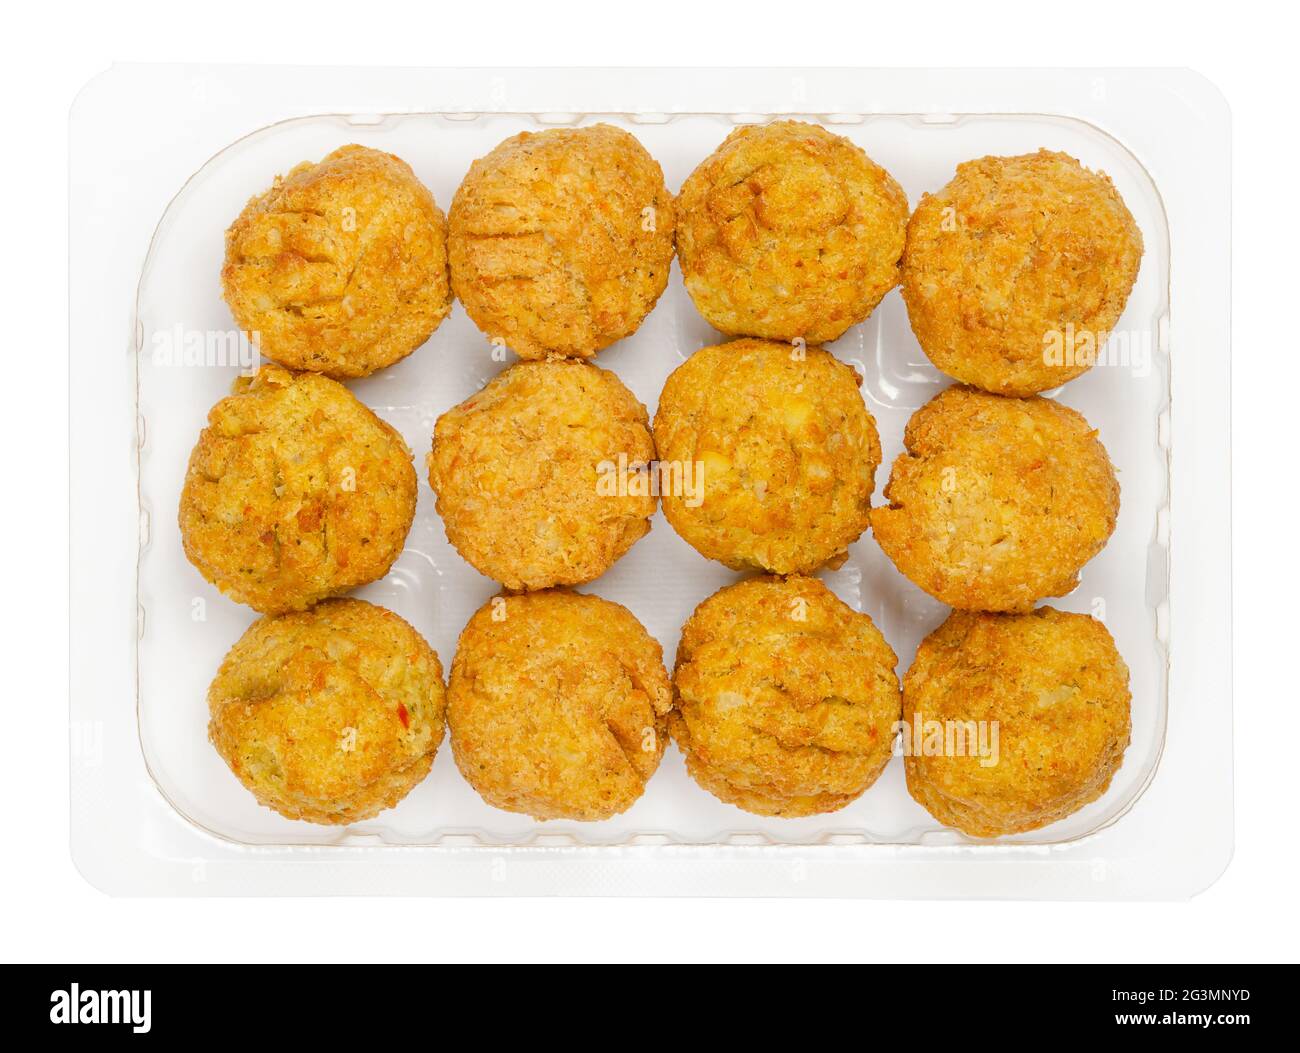 Pre-fried vegan falafel balls, in a clear plastic container. Ball shaped fritters, based on chickpeas and rice, a traditional Middle Eastern food. Stock Photo